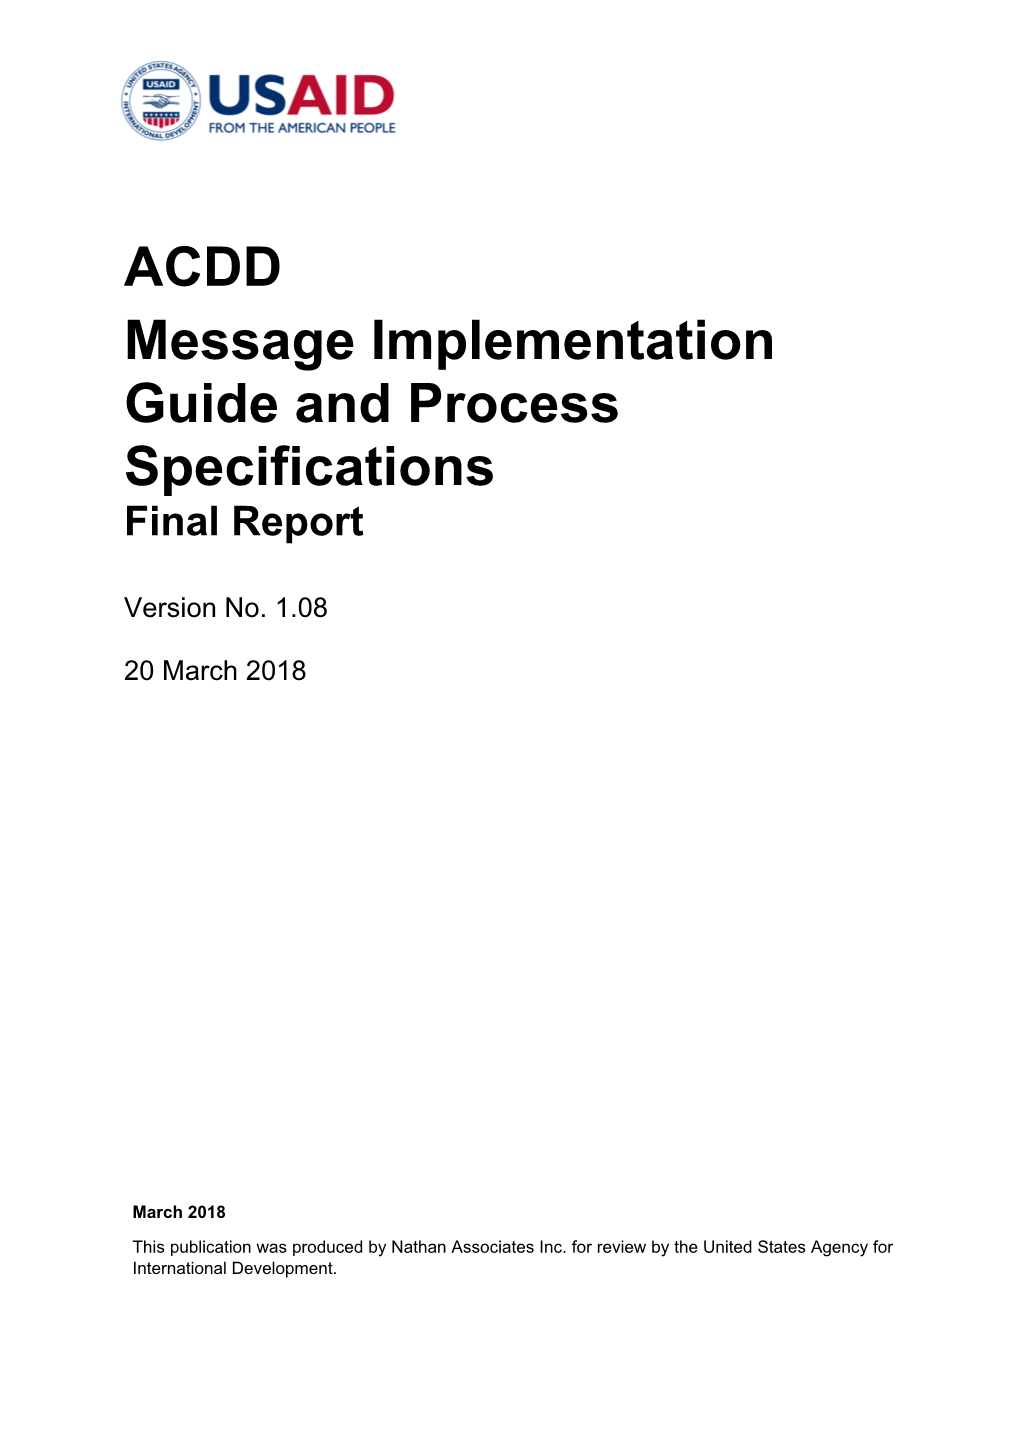 ACDD Message Implementation Guide and Process Specifications Final Report